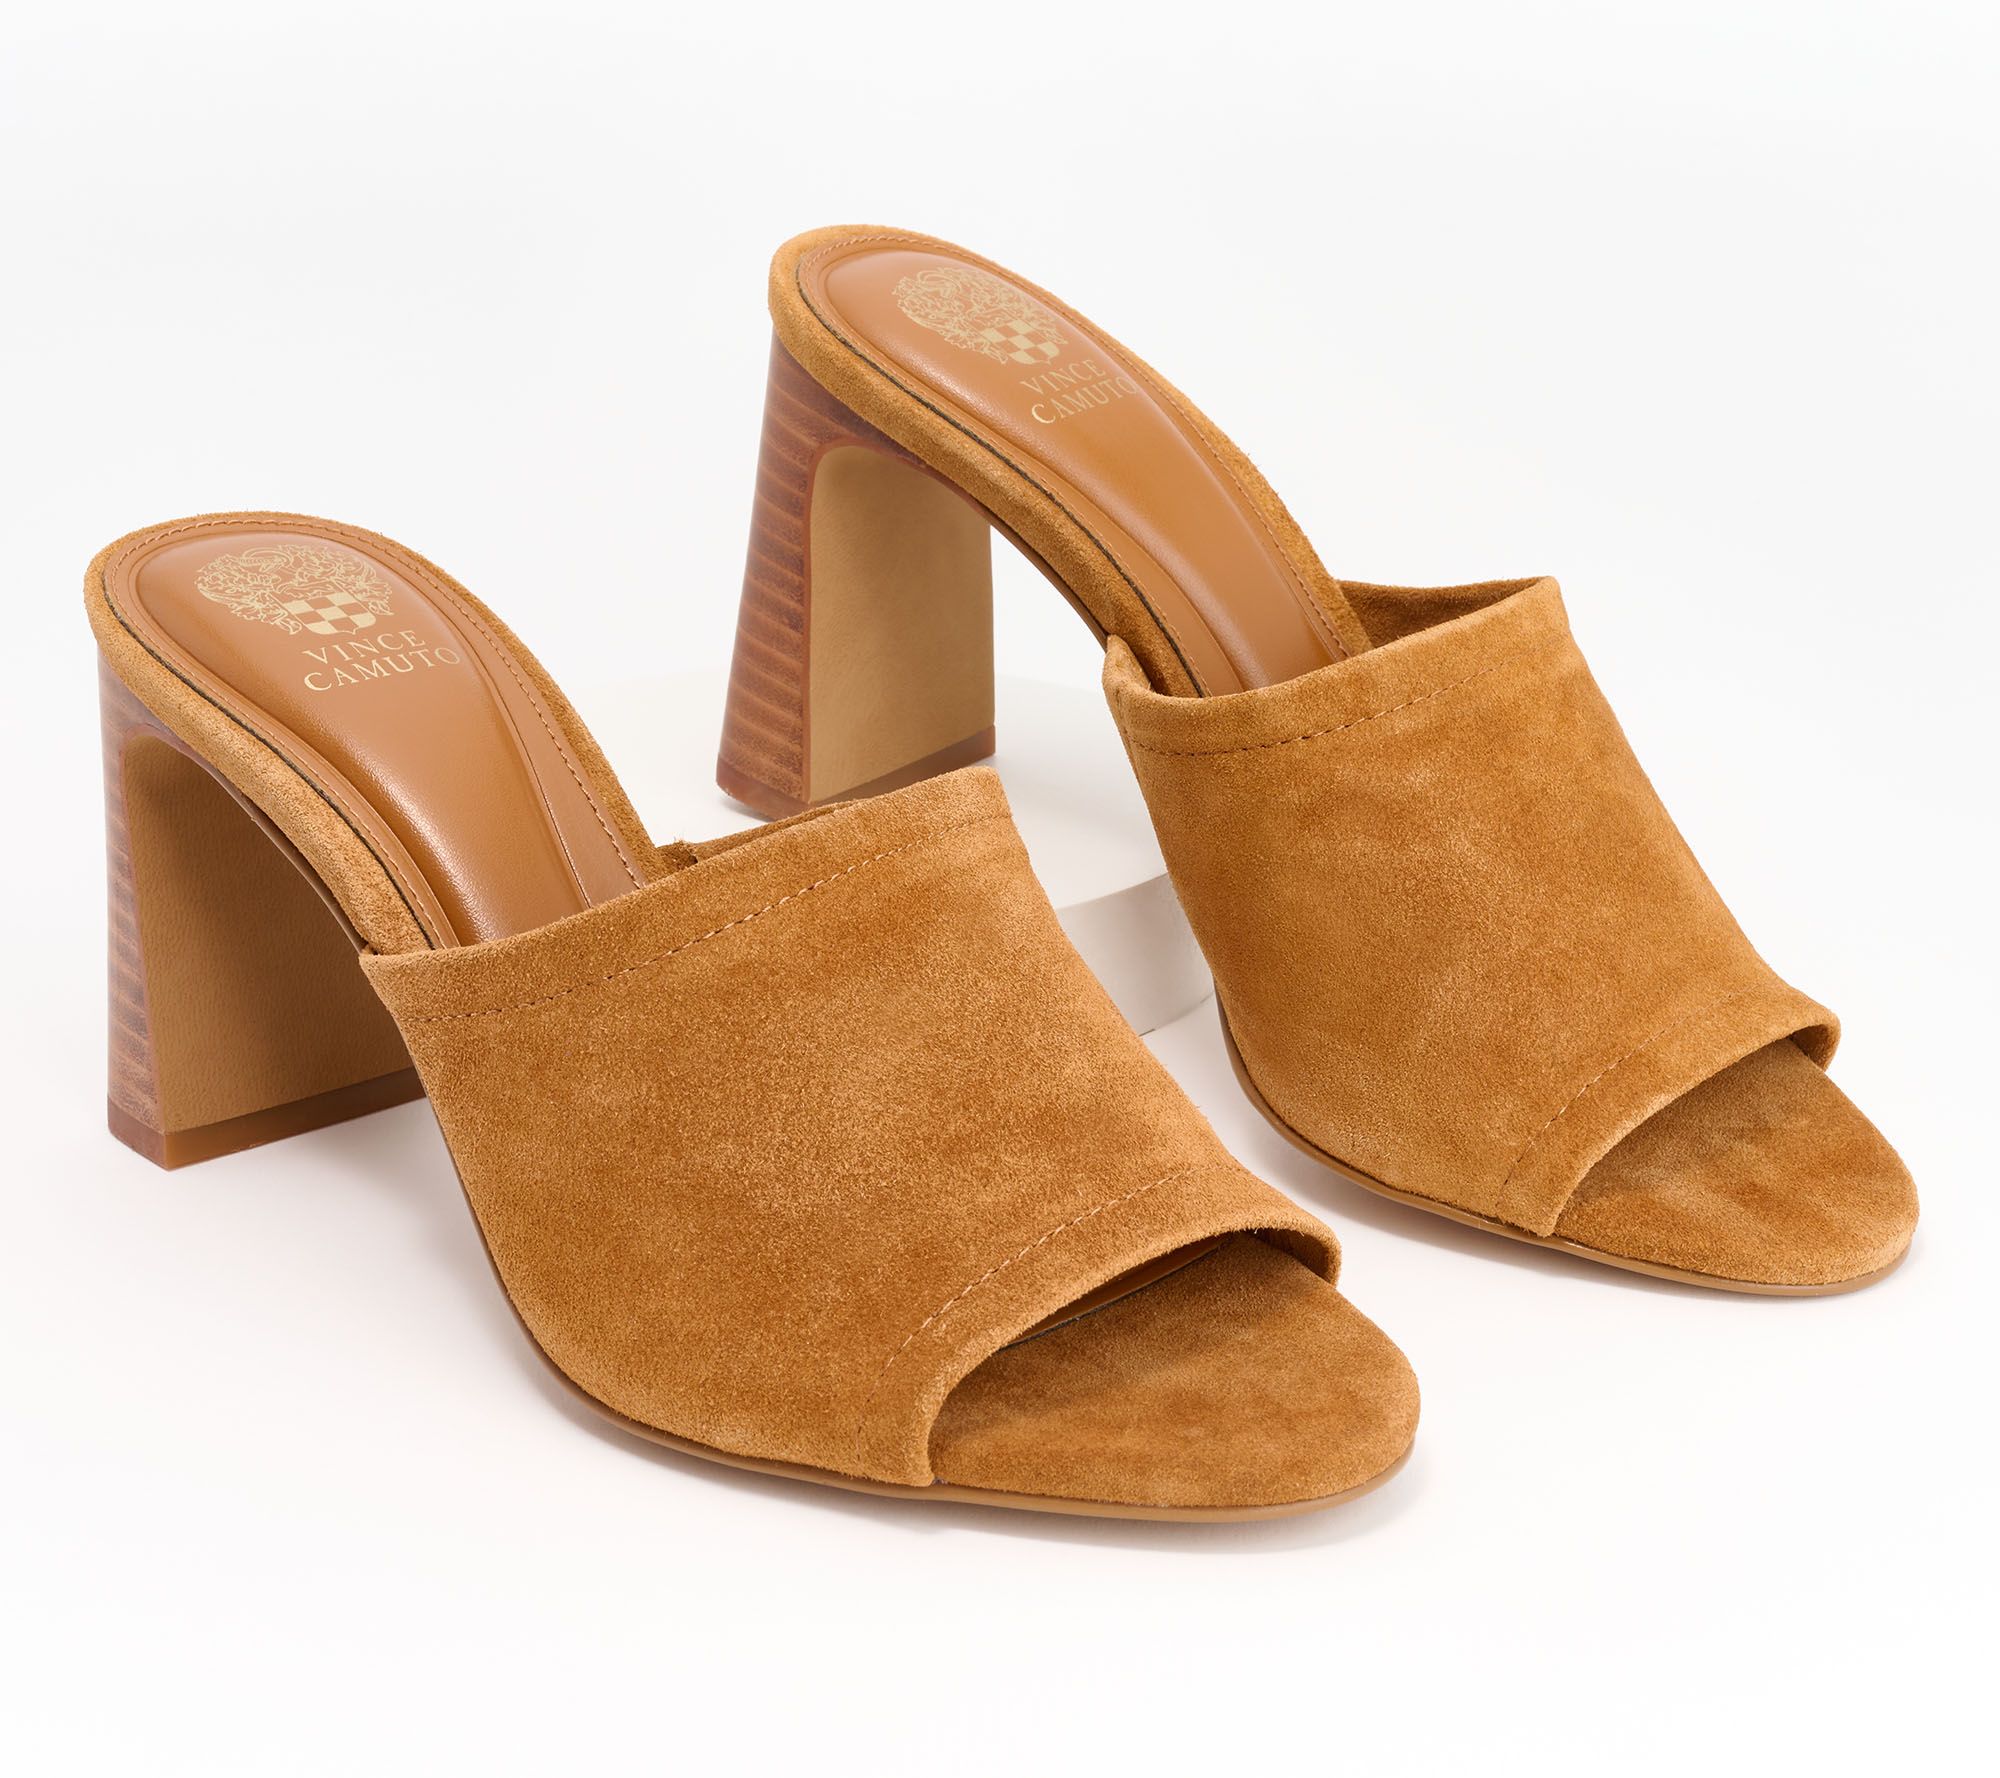 Vince Camuto Leather or Suede Ankle Boots - Okalinra 